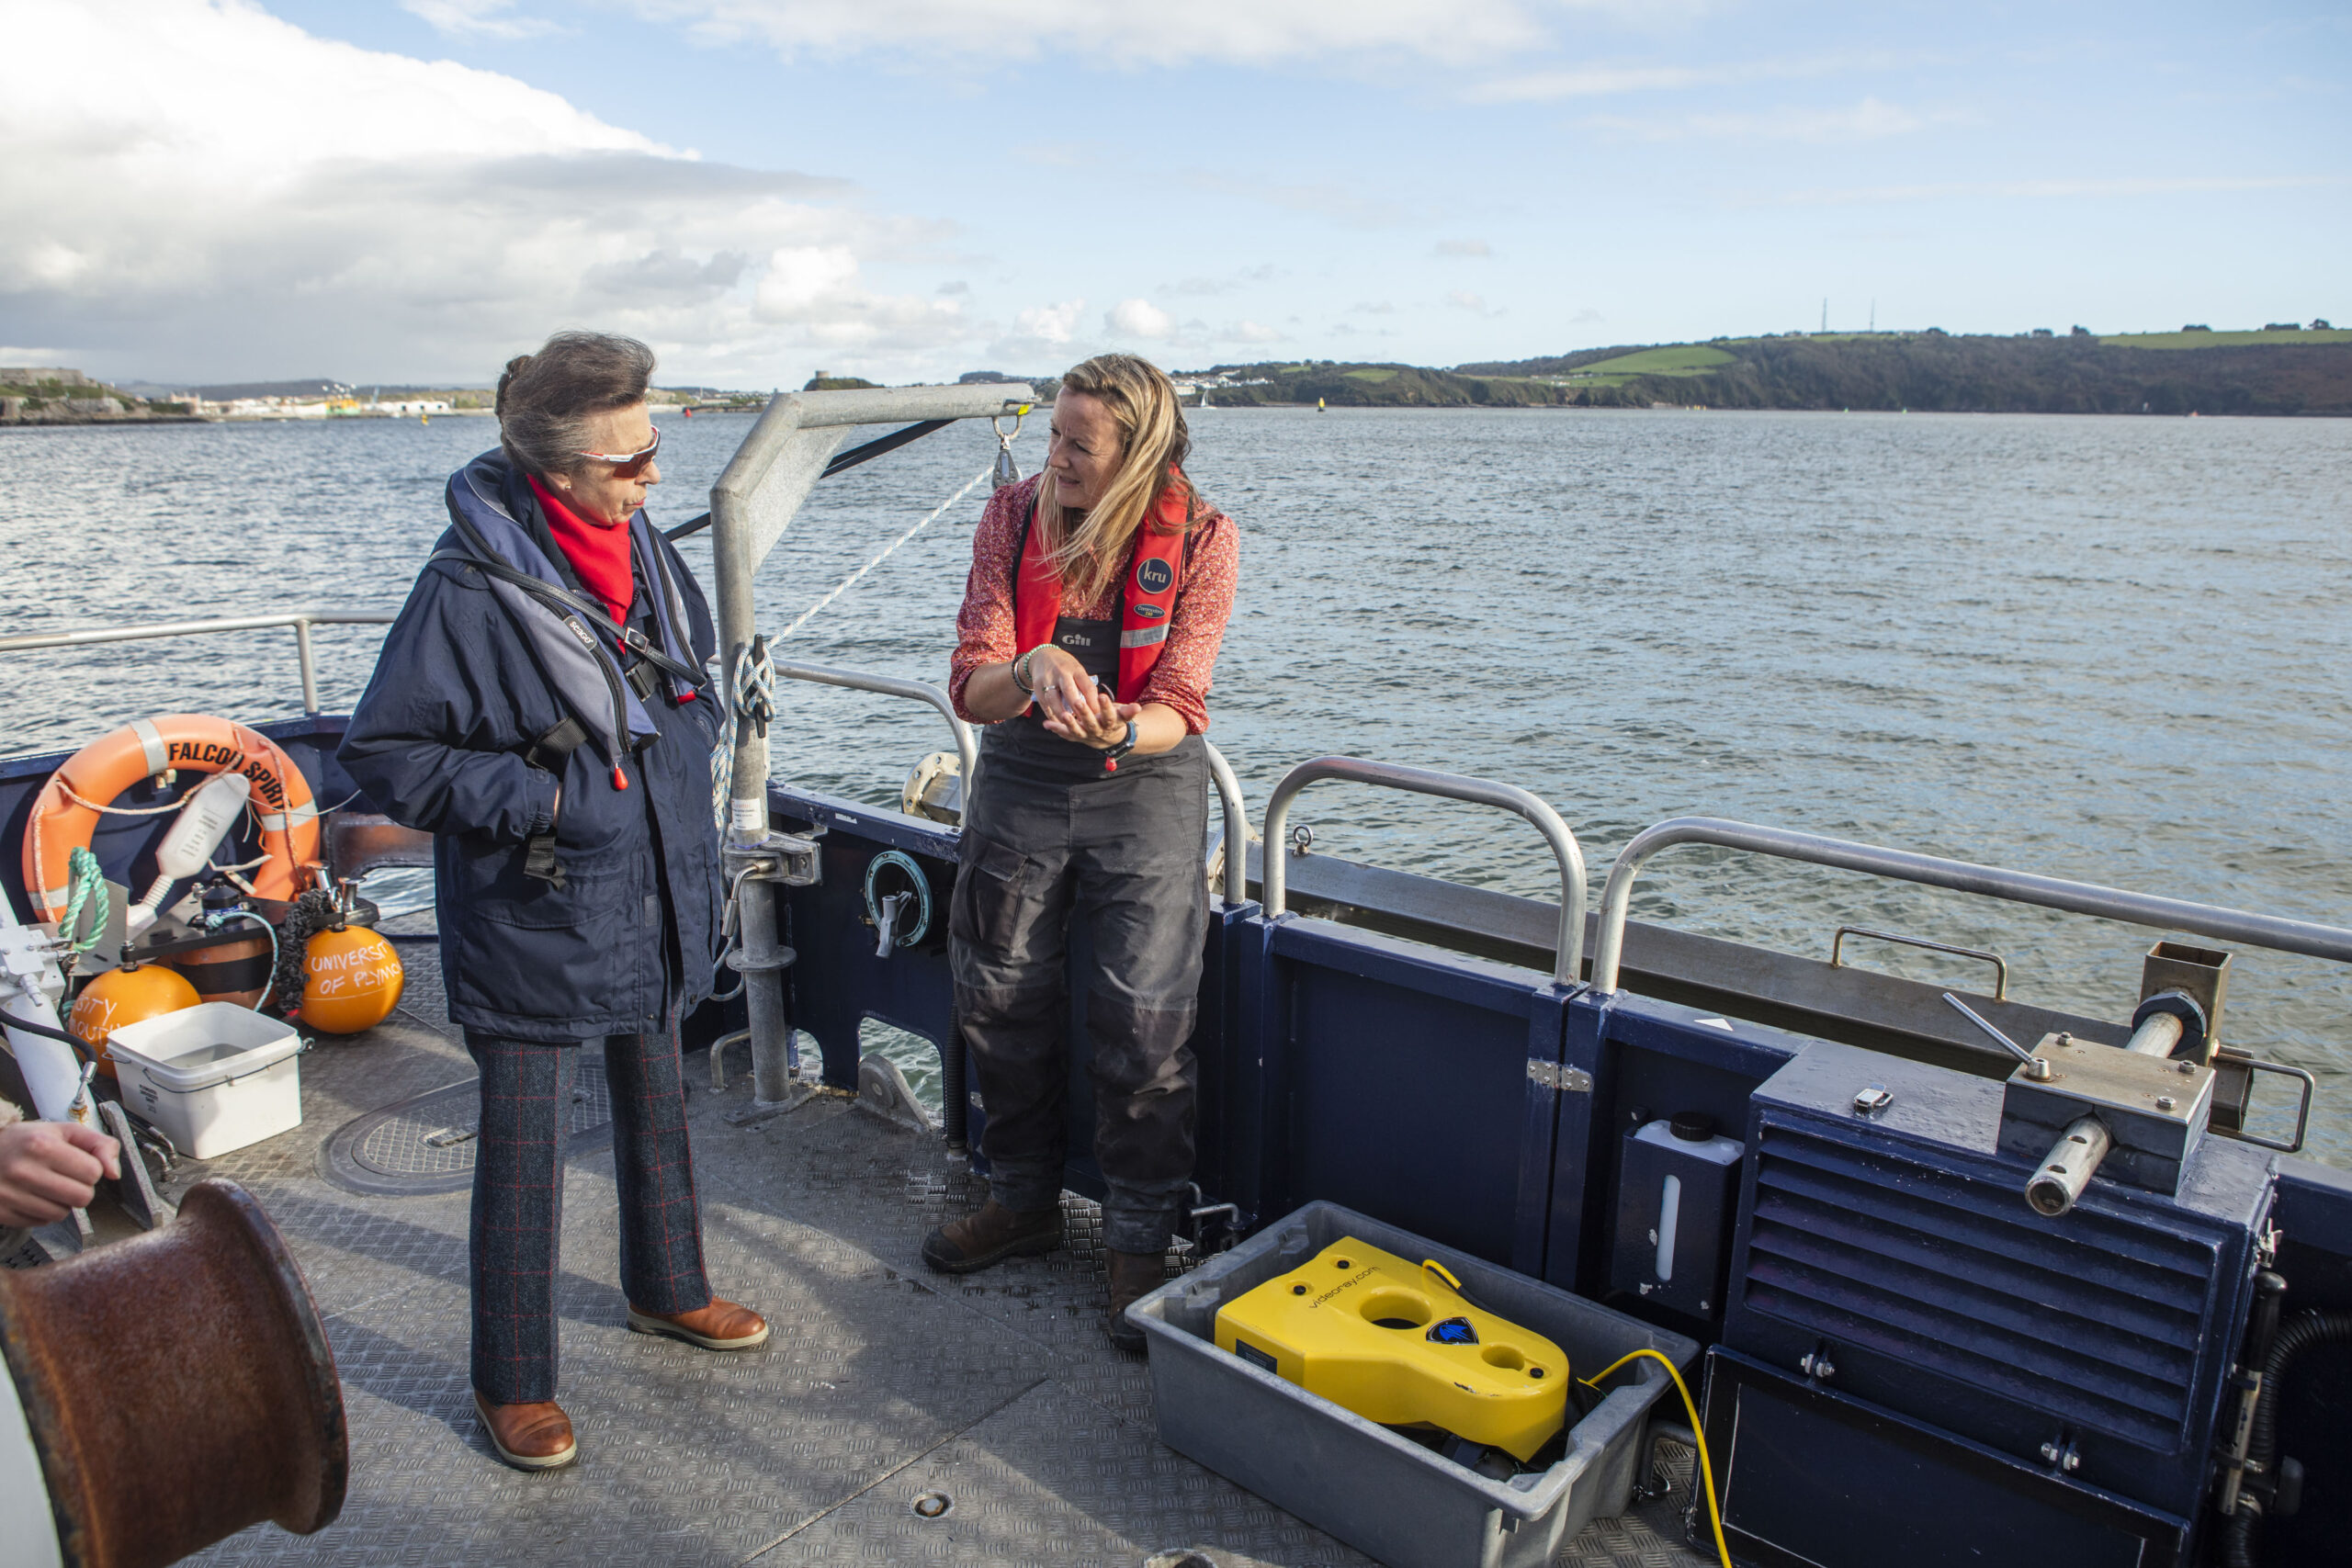 HRH The Princess Royal explores Plymouth Seafood Industry & Marine Environment